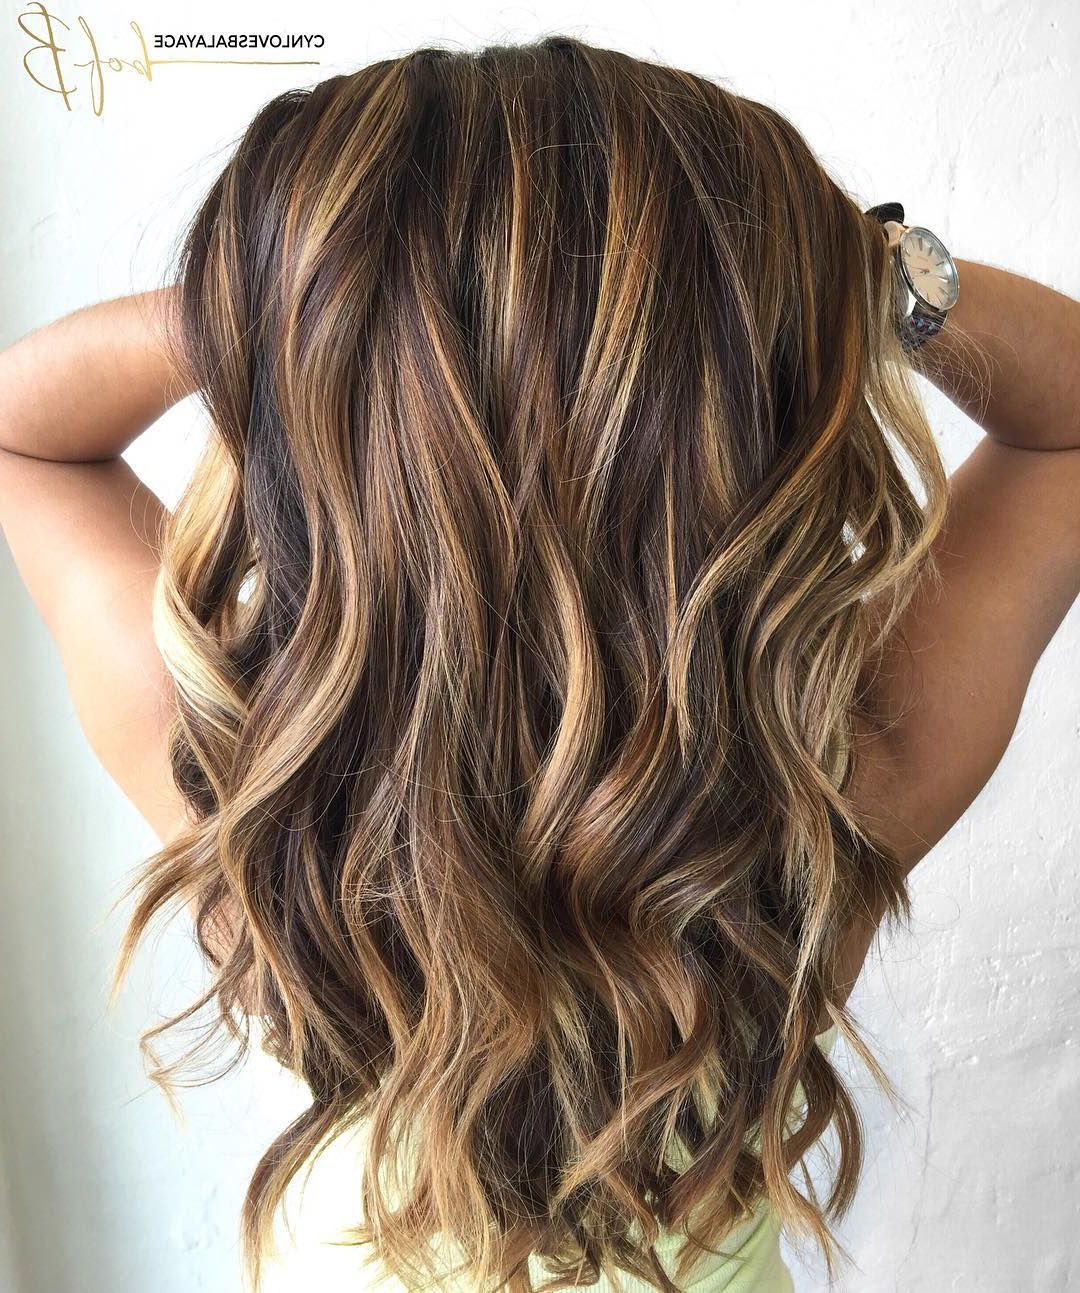 Preferred Curly Golden Brown Balayage Long Hairstyles In 60 Looks With Caramel Highlights On Brown And Dark Brown Hair (View 7 of 20)